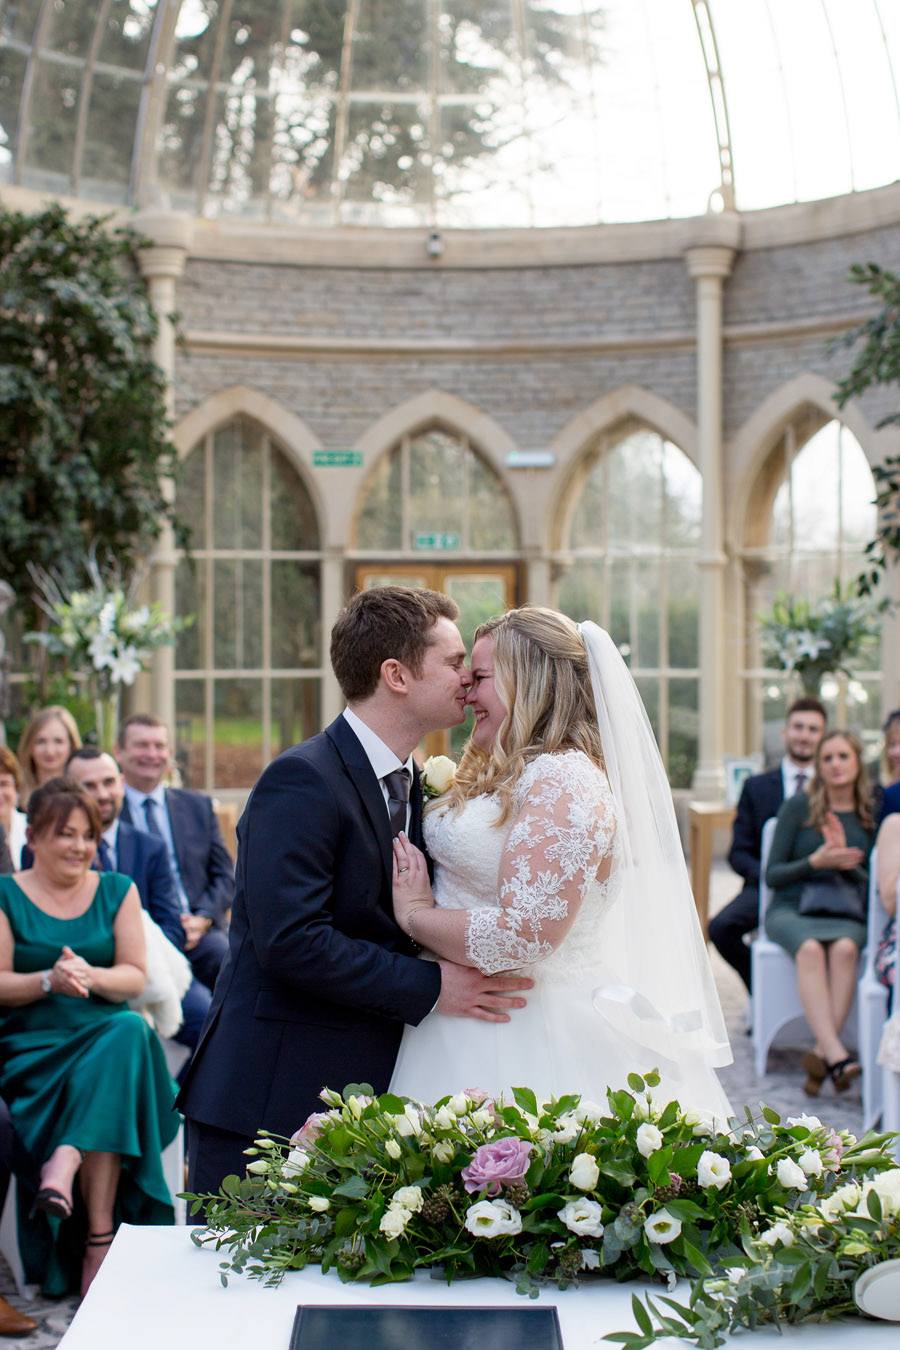 A magical winter wedding at Tortworth Court, images by Martin Dabek Photography (15)